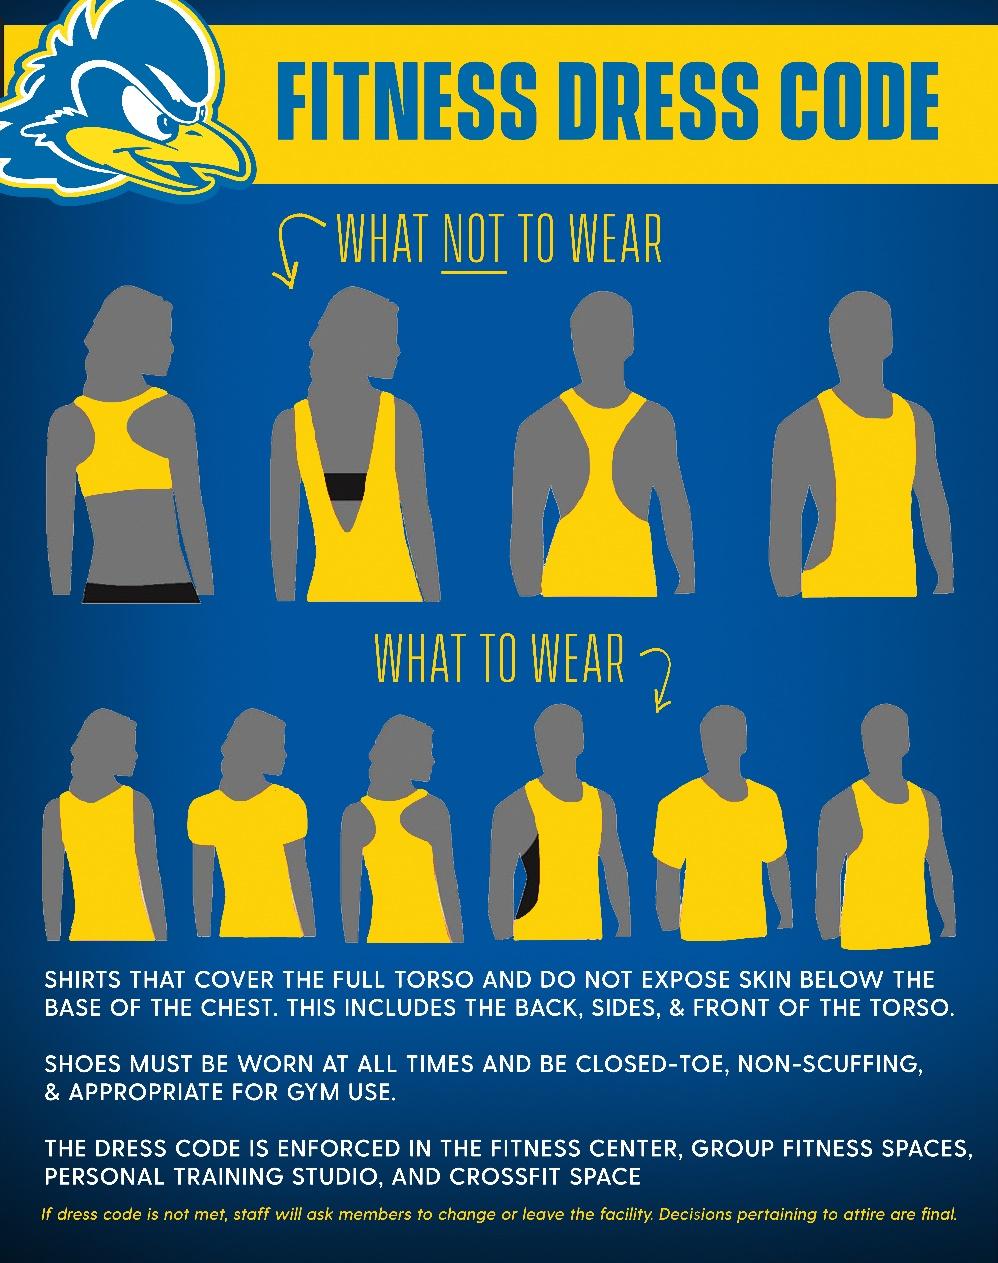 Gym Attire Policy Appropriate apparel must be worn while working out in the student fitness center. Those in violation will be asked to change immediately Shoes must be worn at all times.